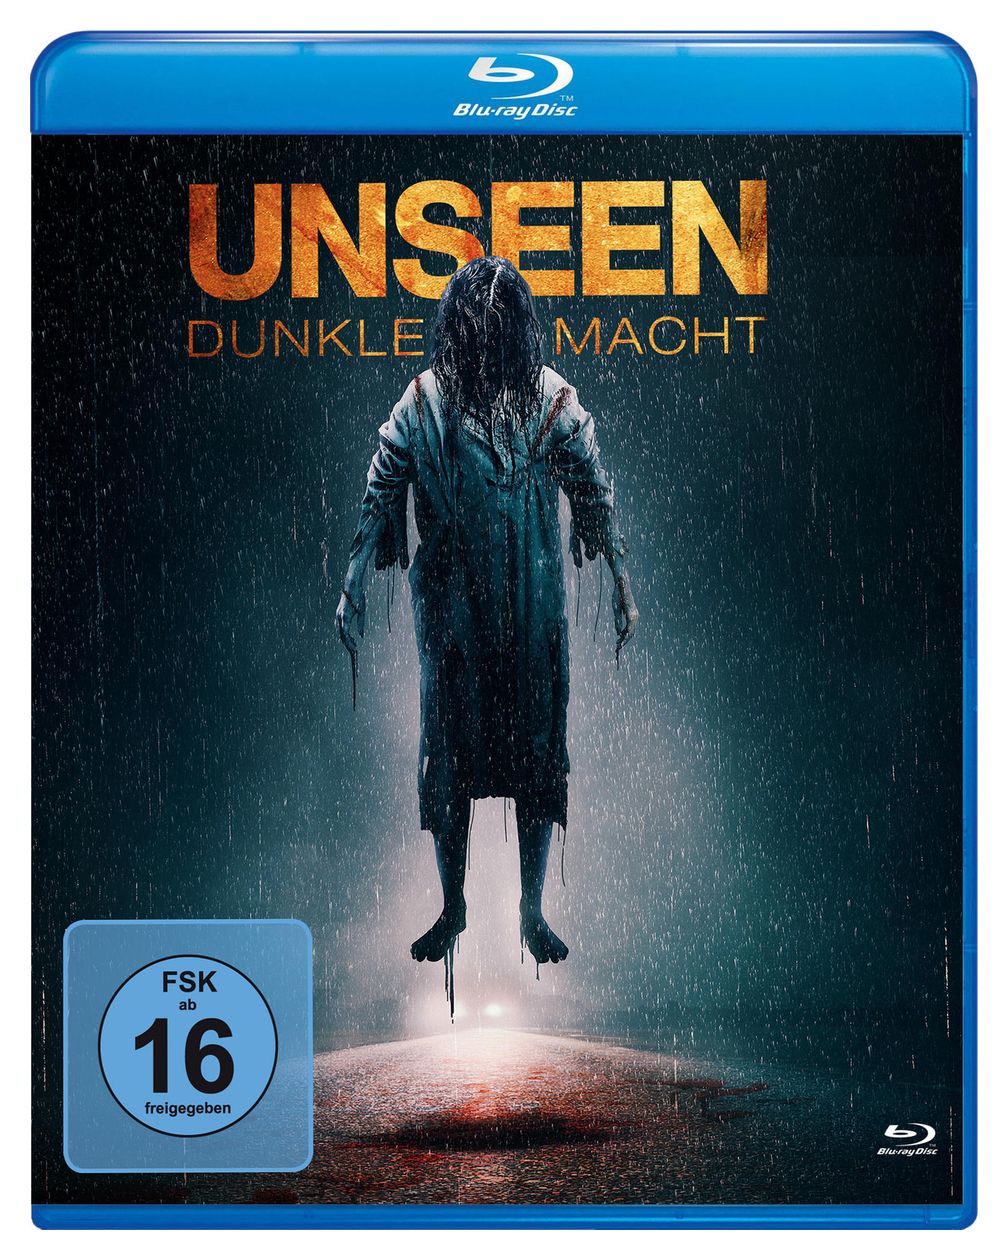 Unseen - Dunkle Macht (Blu-Ray) 